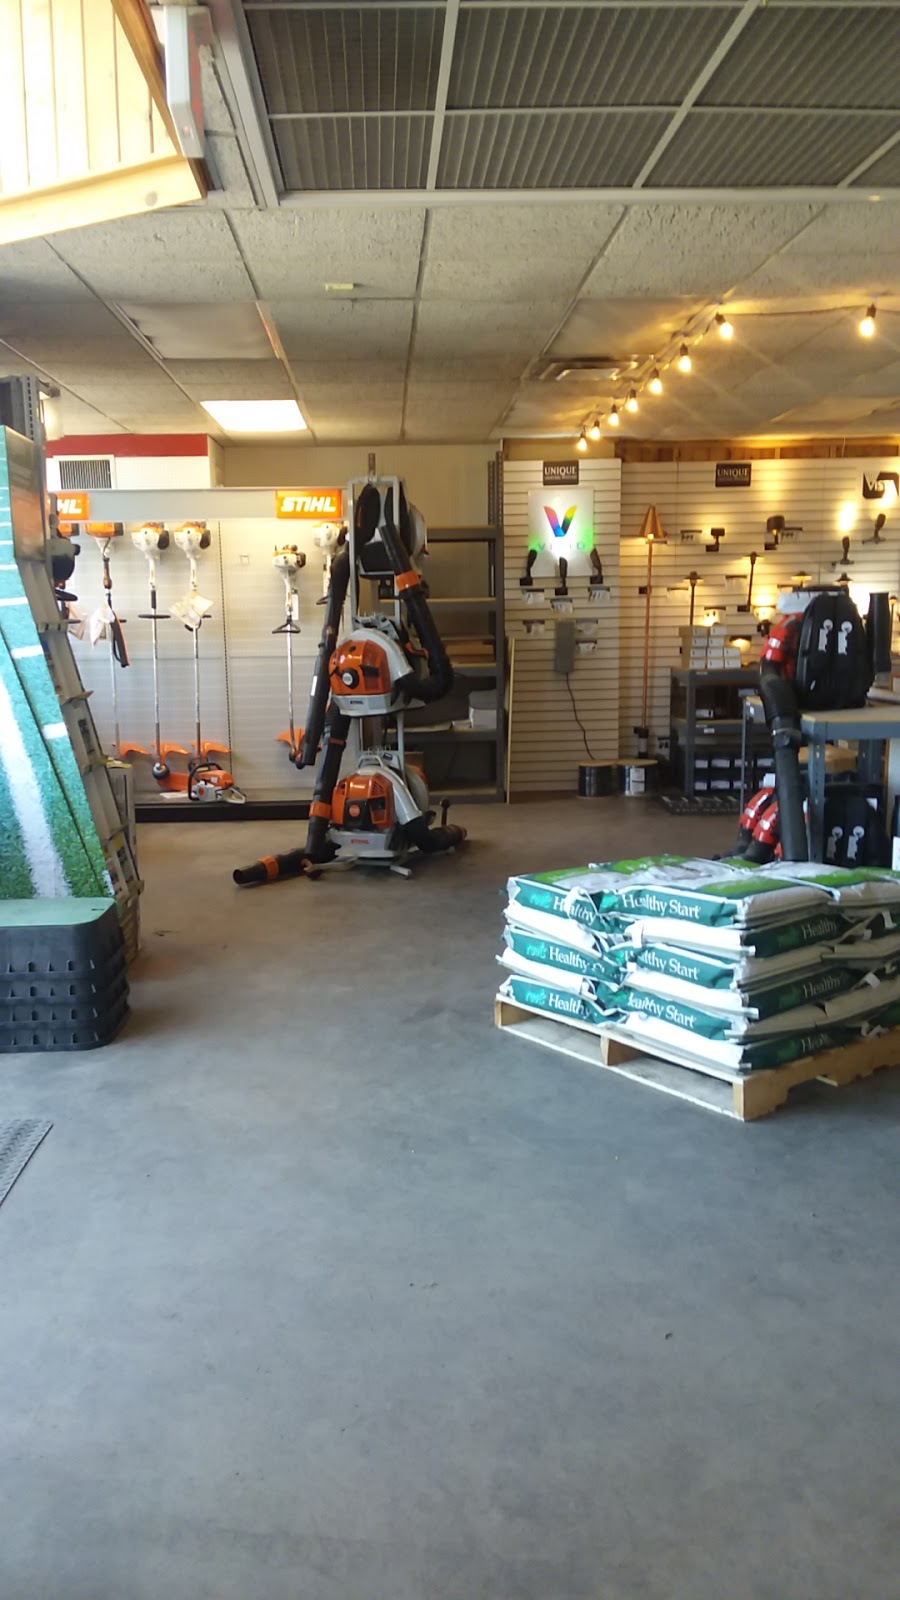 SiteOne Landscape Supply | 470 Deer Pk Ave, Dix Hills, NY 11746 | Phone: (631) 493-1600